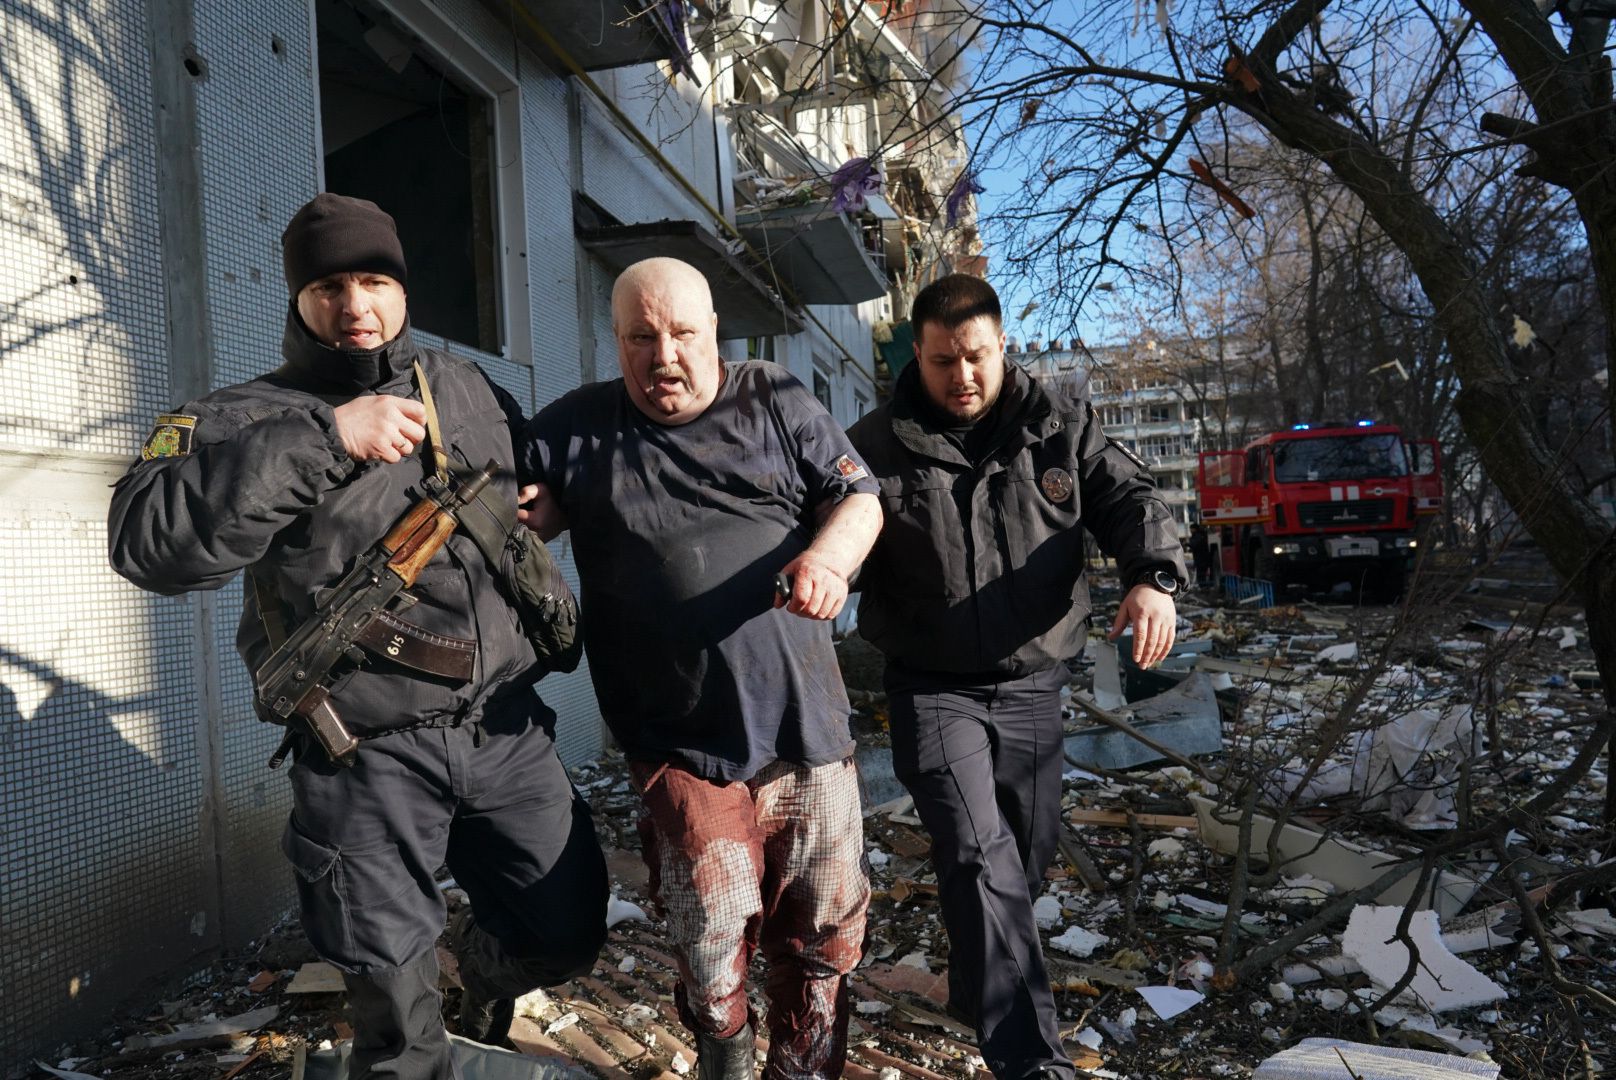 Ukrainian security forces accompany a wounded man after an airstrike hit an apartment complex in Chuhuiv, Kharkiv Oblast, Ukraine on February 24.